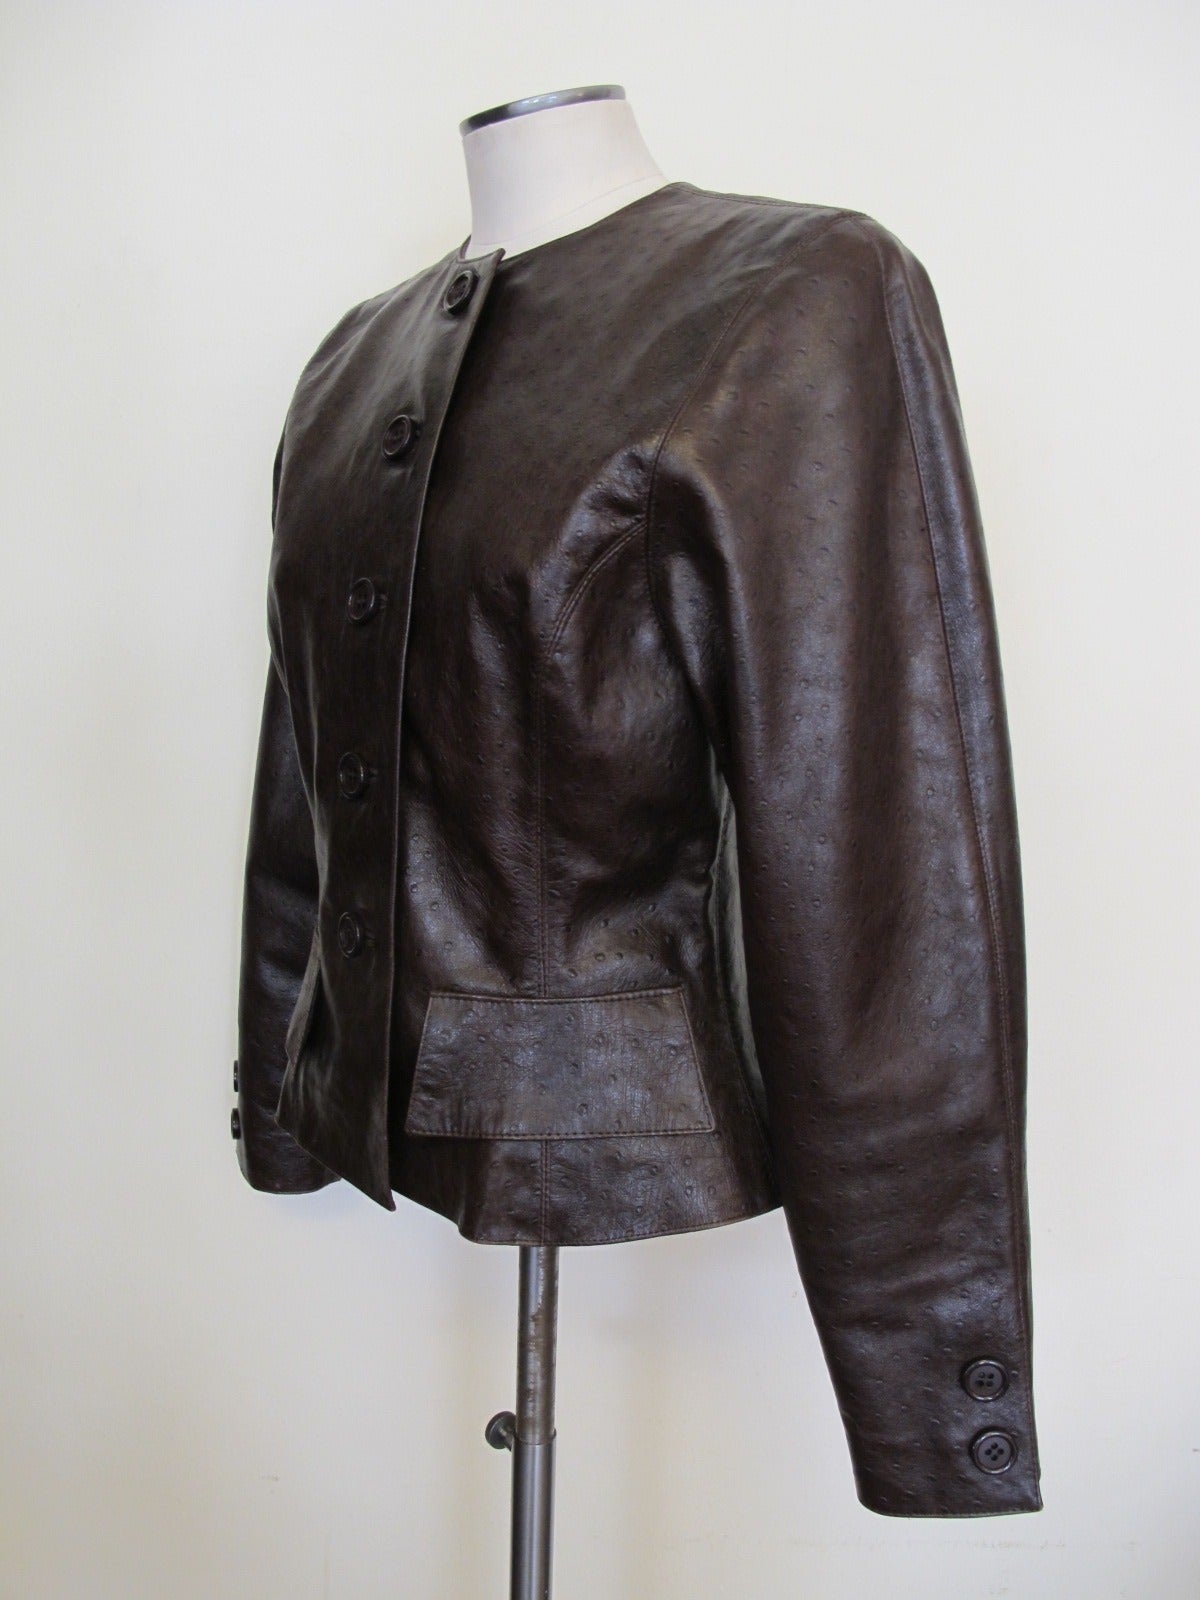 Chic Chocolate Brown Oscar de la Renta Jacket with 5 buttons. The Ostrich component contributes realty to the elegance of the look. Fabulous Piece! Shoulder to shoulder measures 14 inches.